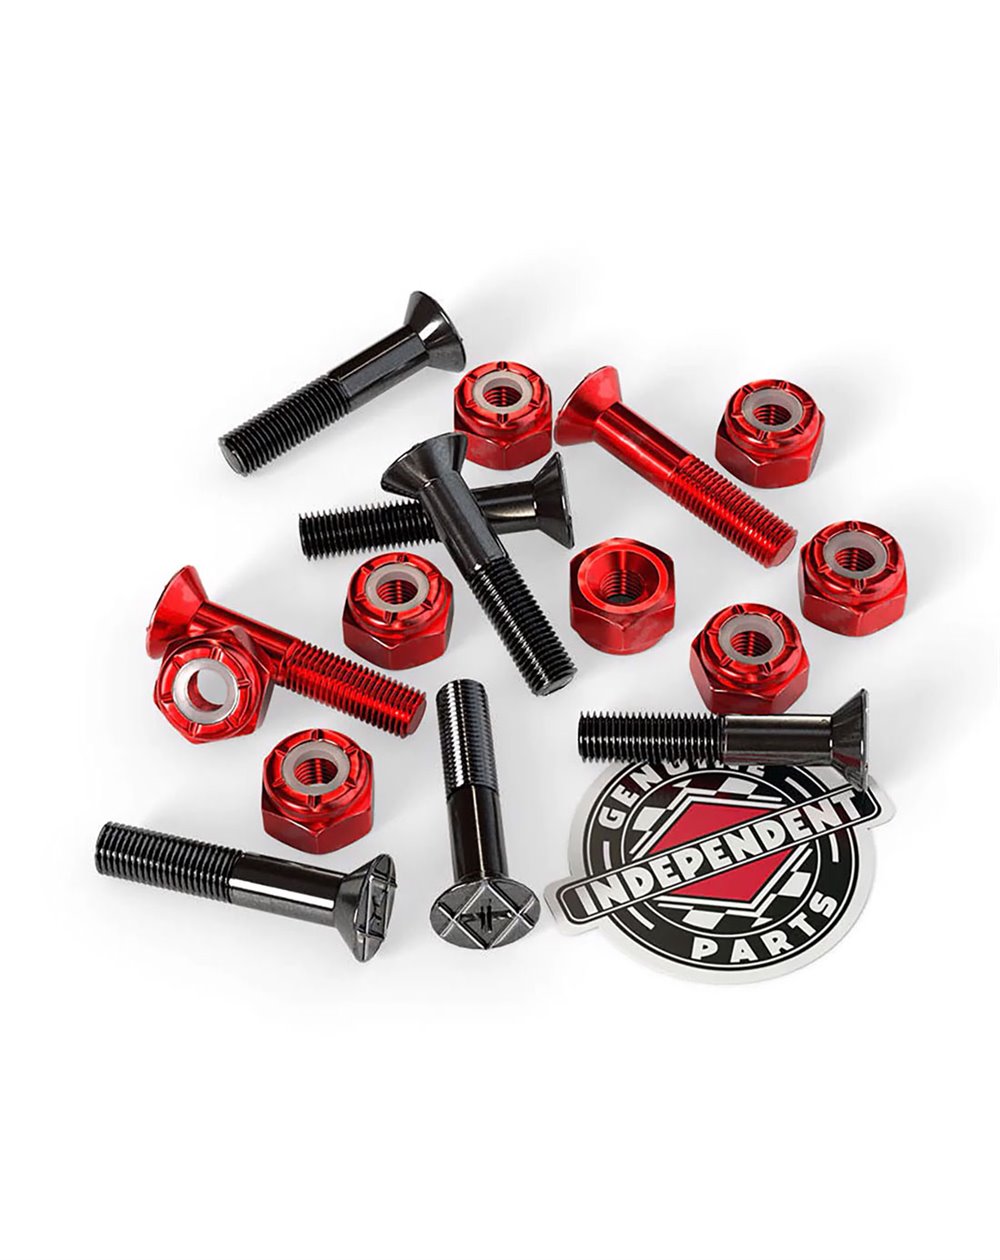 Independent Tornillos Skateboard Genuine Parts 7/8" Phillips Black/Red